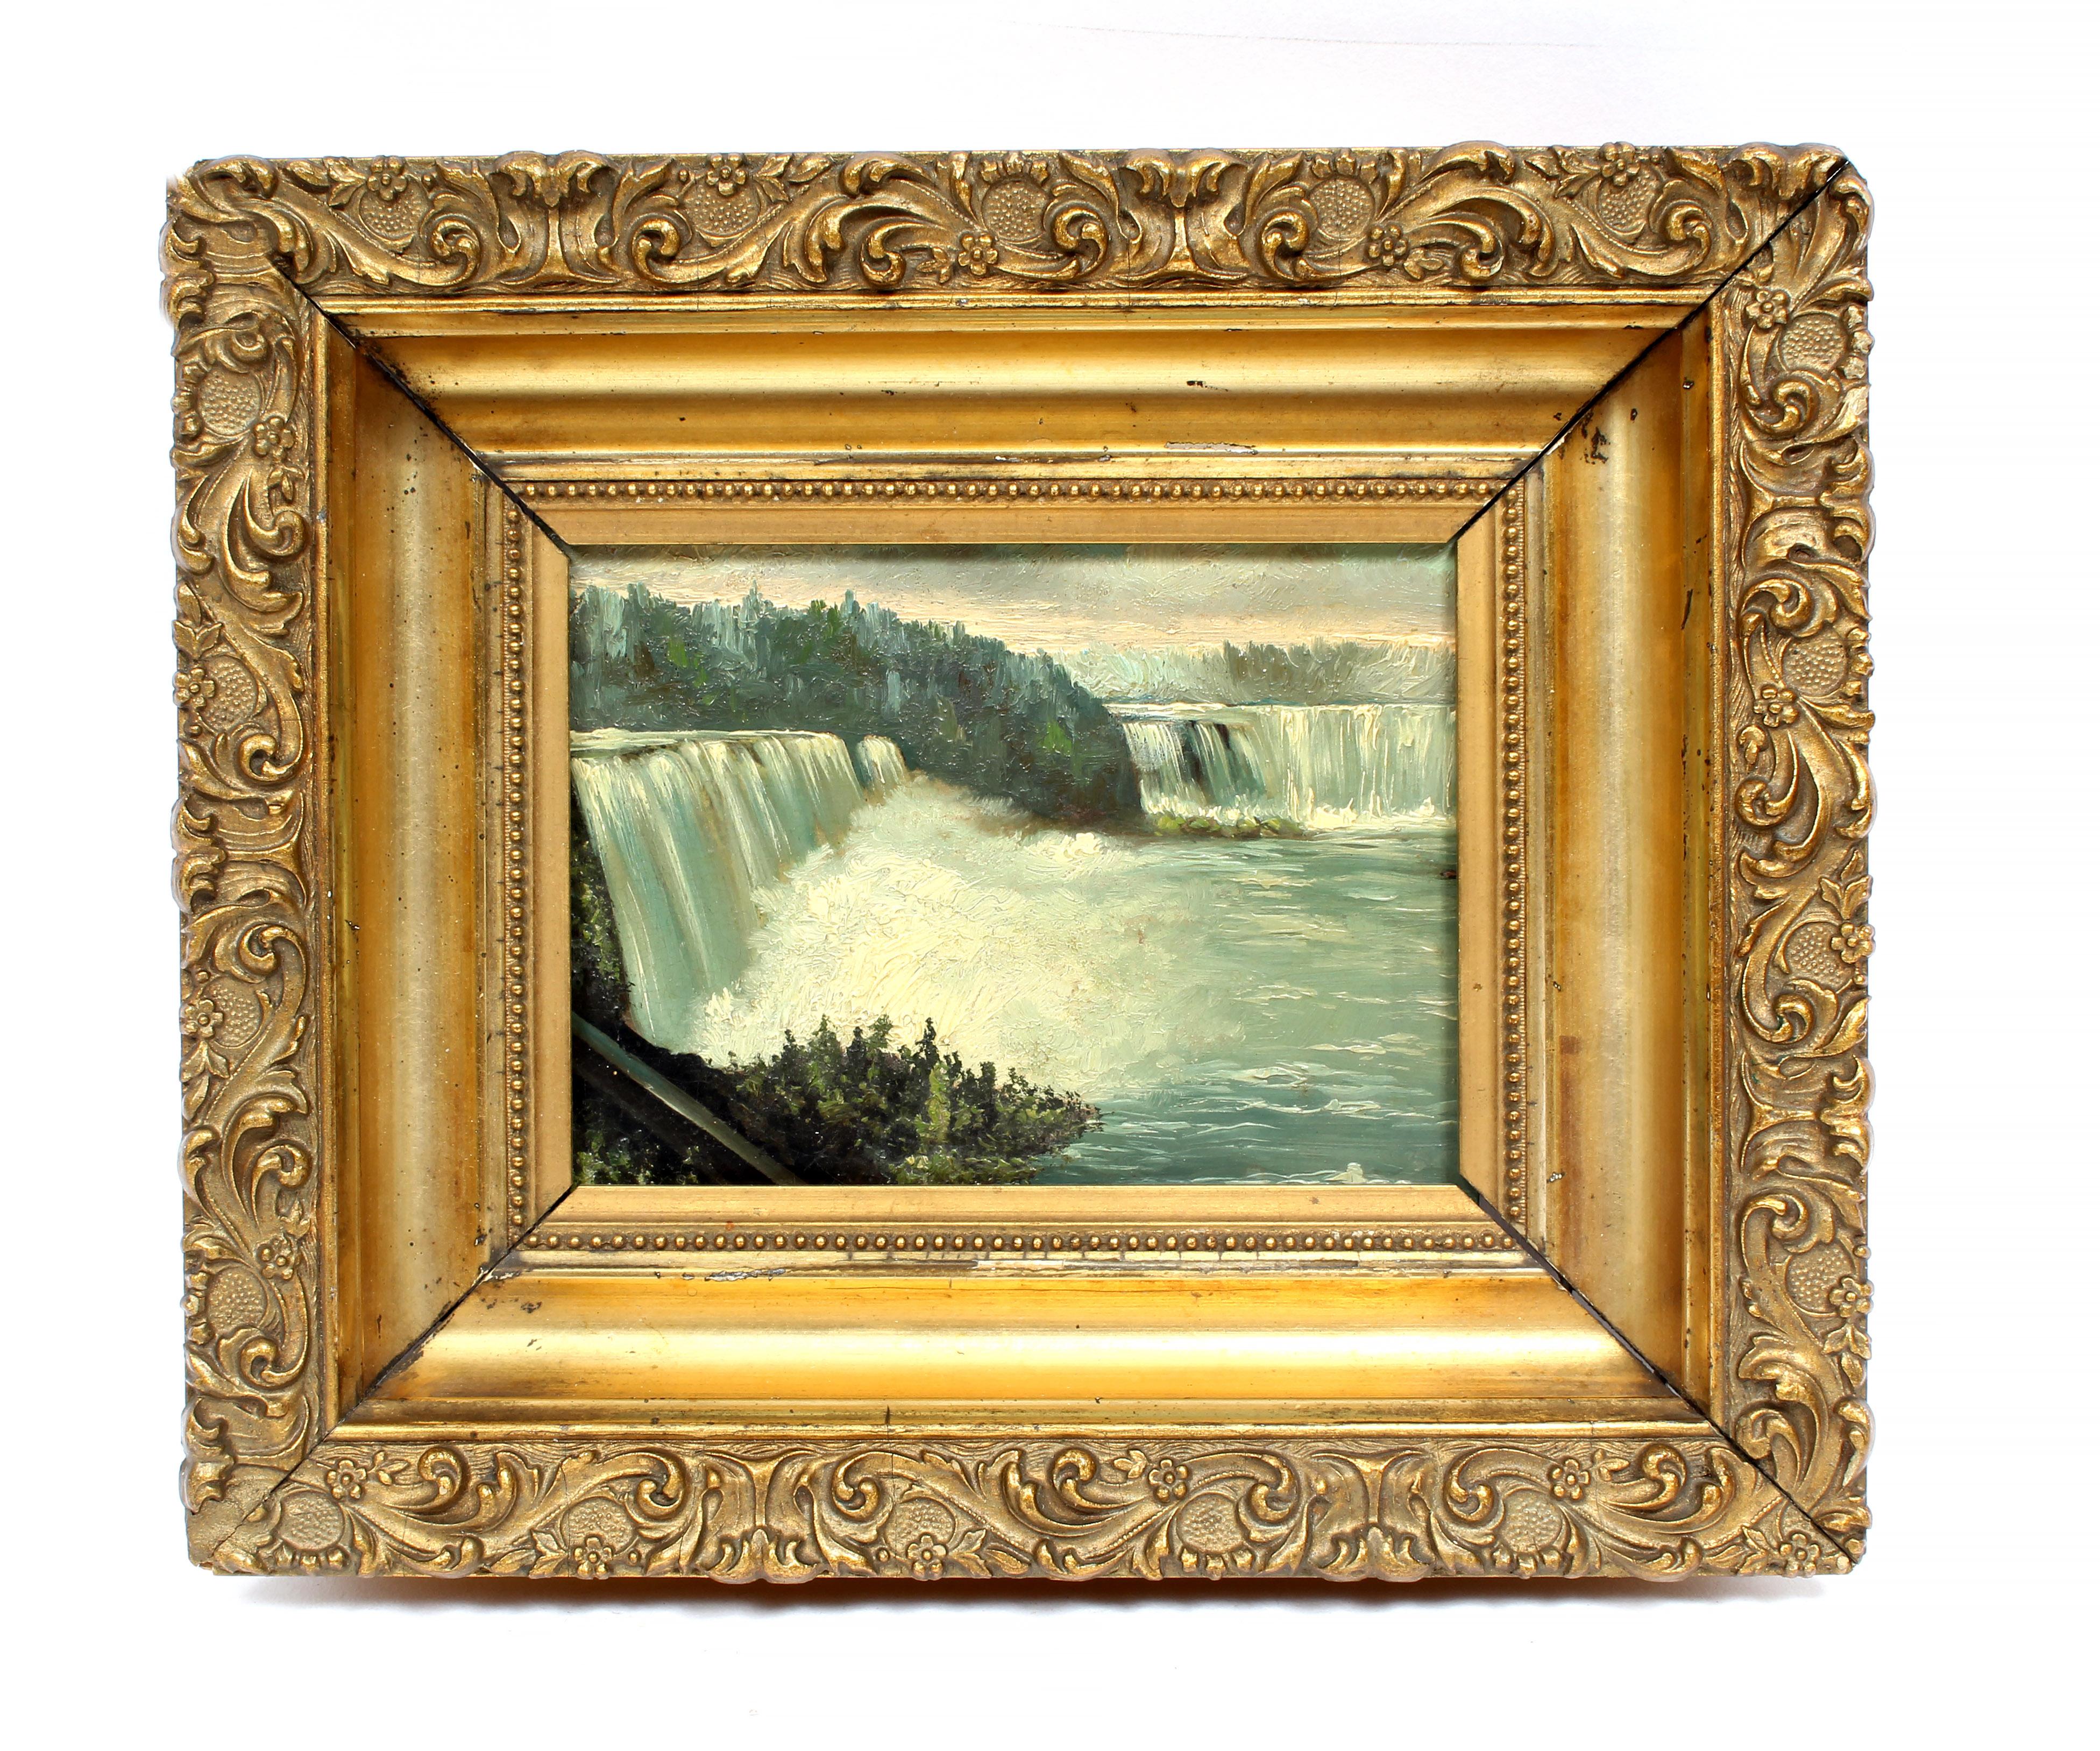 Niagara Falls Oil Painting Antique American Original Frame Maid of the Mist Rare - Brown Landscape Painting by Unknown